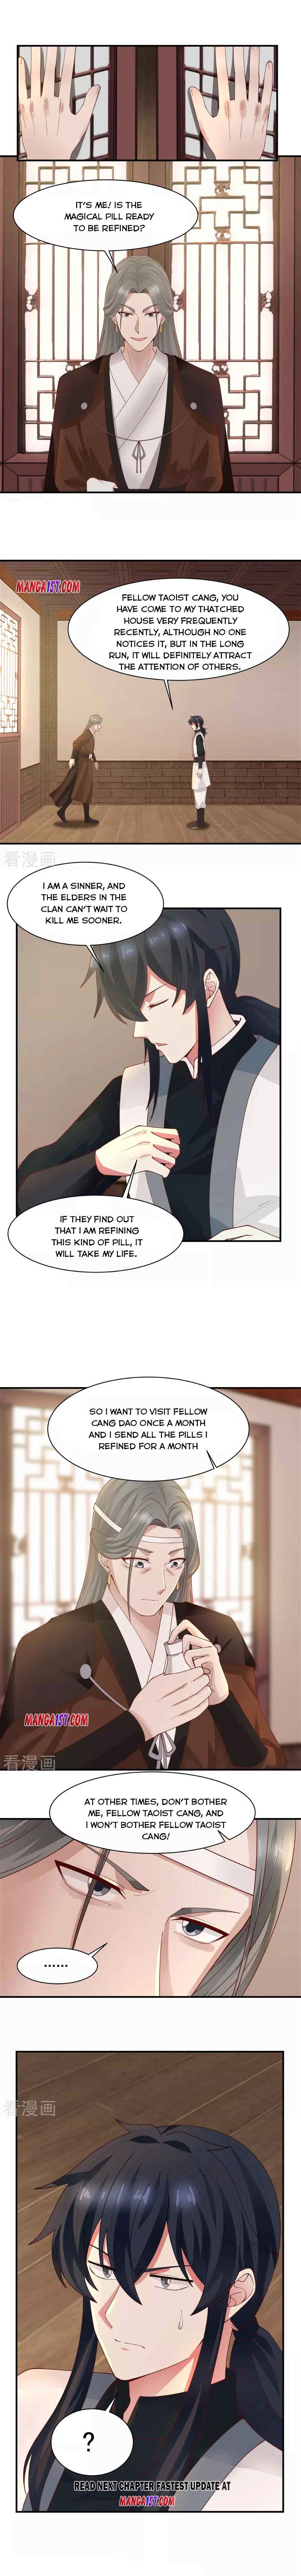 Chaos Alchemist Chapter 179 - Page 3